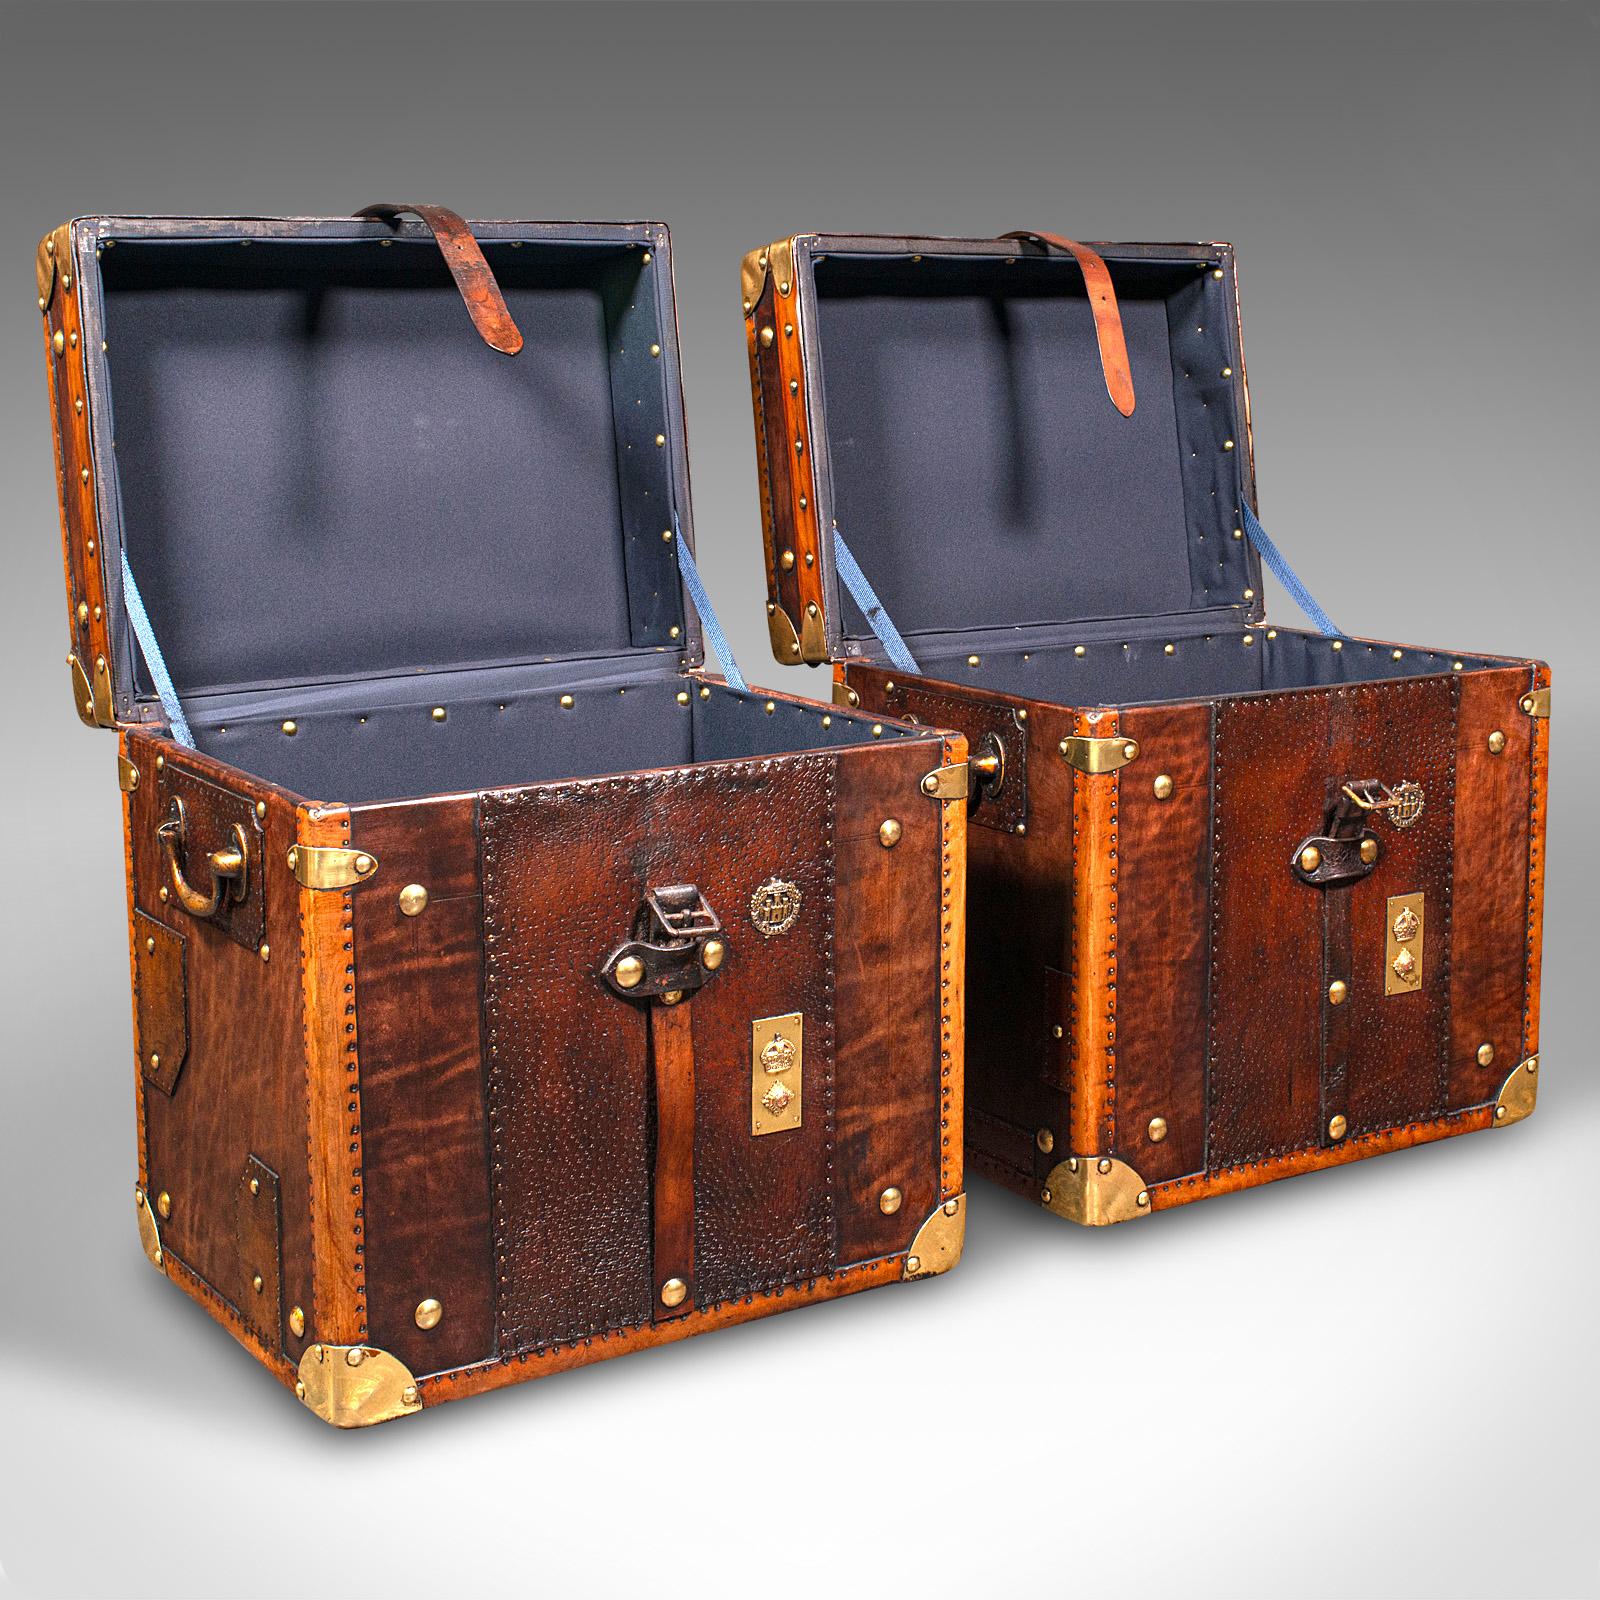 This is a pair of vintage campaign luggage cases. An English, leather and brass bound Lieutenant Colonel’s bedside nightstand, dating to the mid 20th century, circa 1950.

Captivating casework, graced with wonderful colour depth and